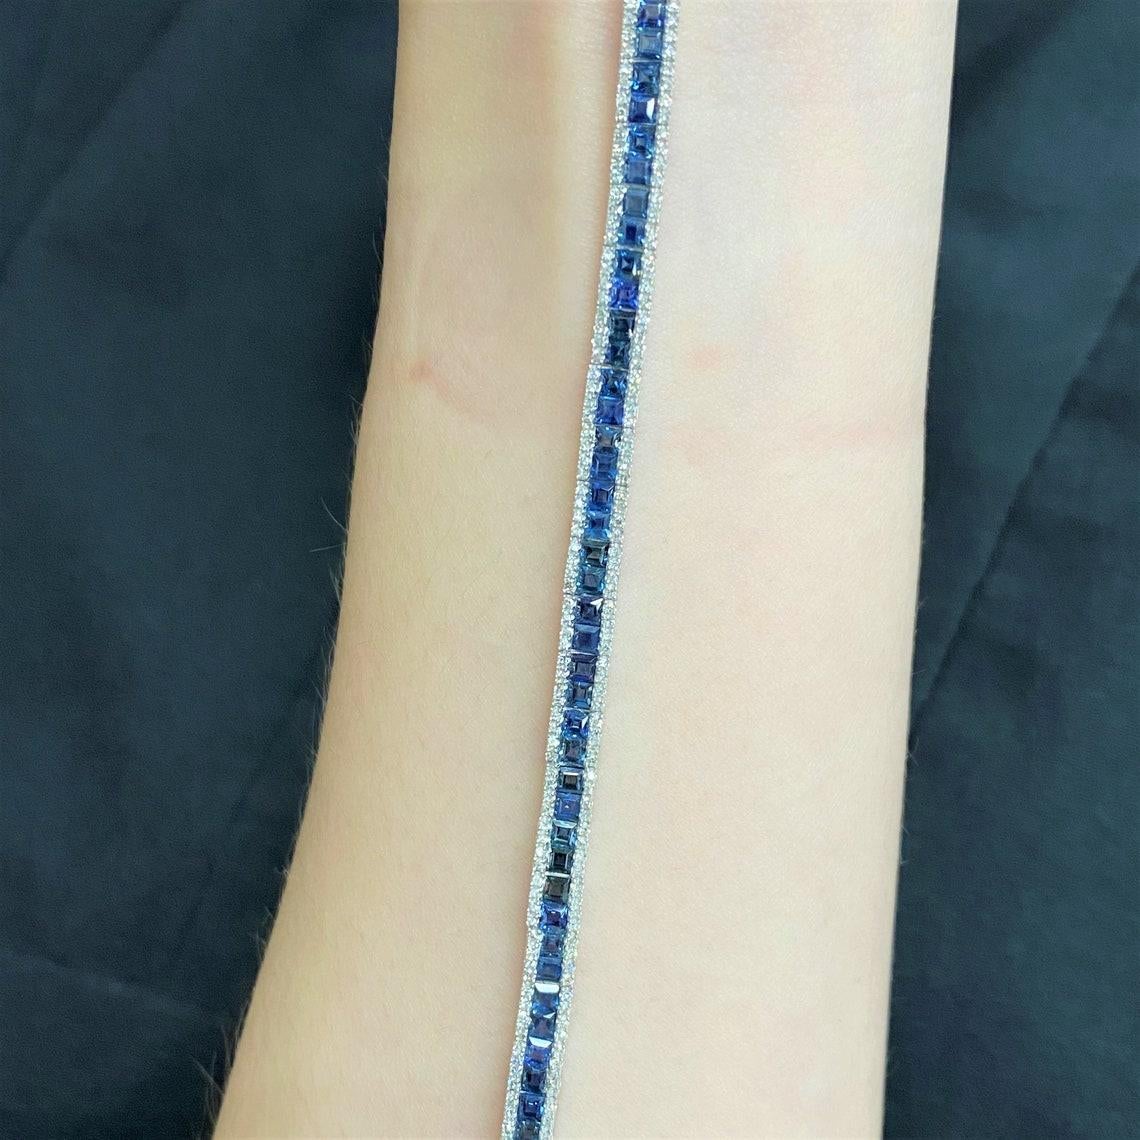 The Following Item we are offering is this Beautiful Rare Important 18KT Gold Deco Style Sparkling Princess Cut Blue Sapphire and Diamond Bracelet. FEATURING Magnificent Rare Gorgeous Fancy Princess Cut Blue Sapphires Framed with Diamonds!!! 
The